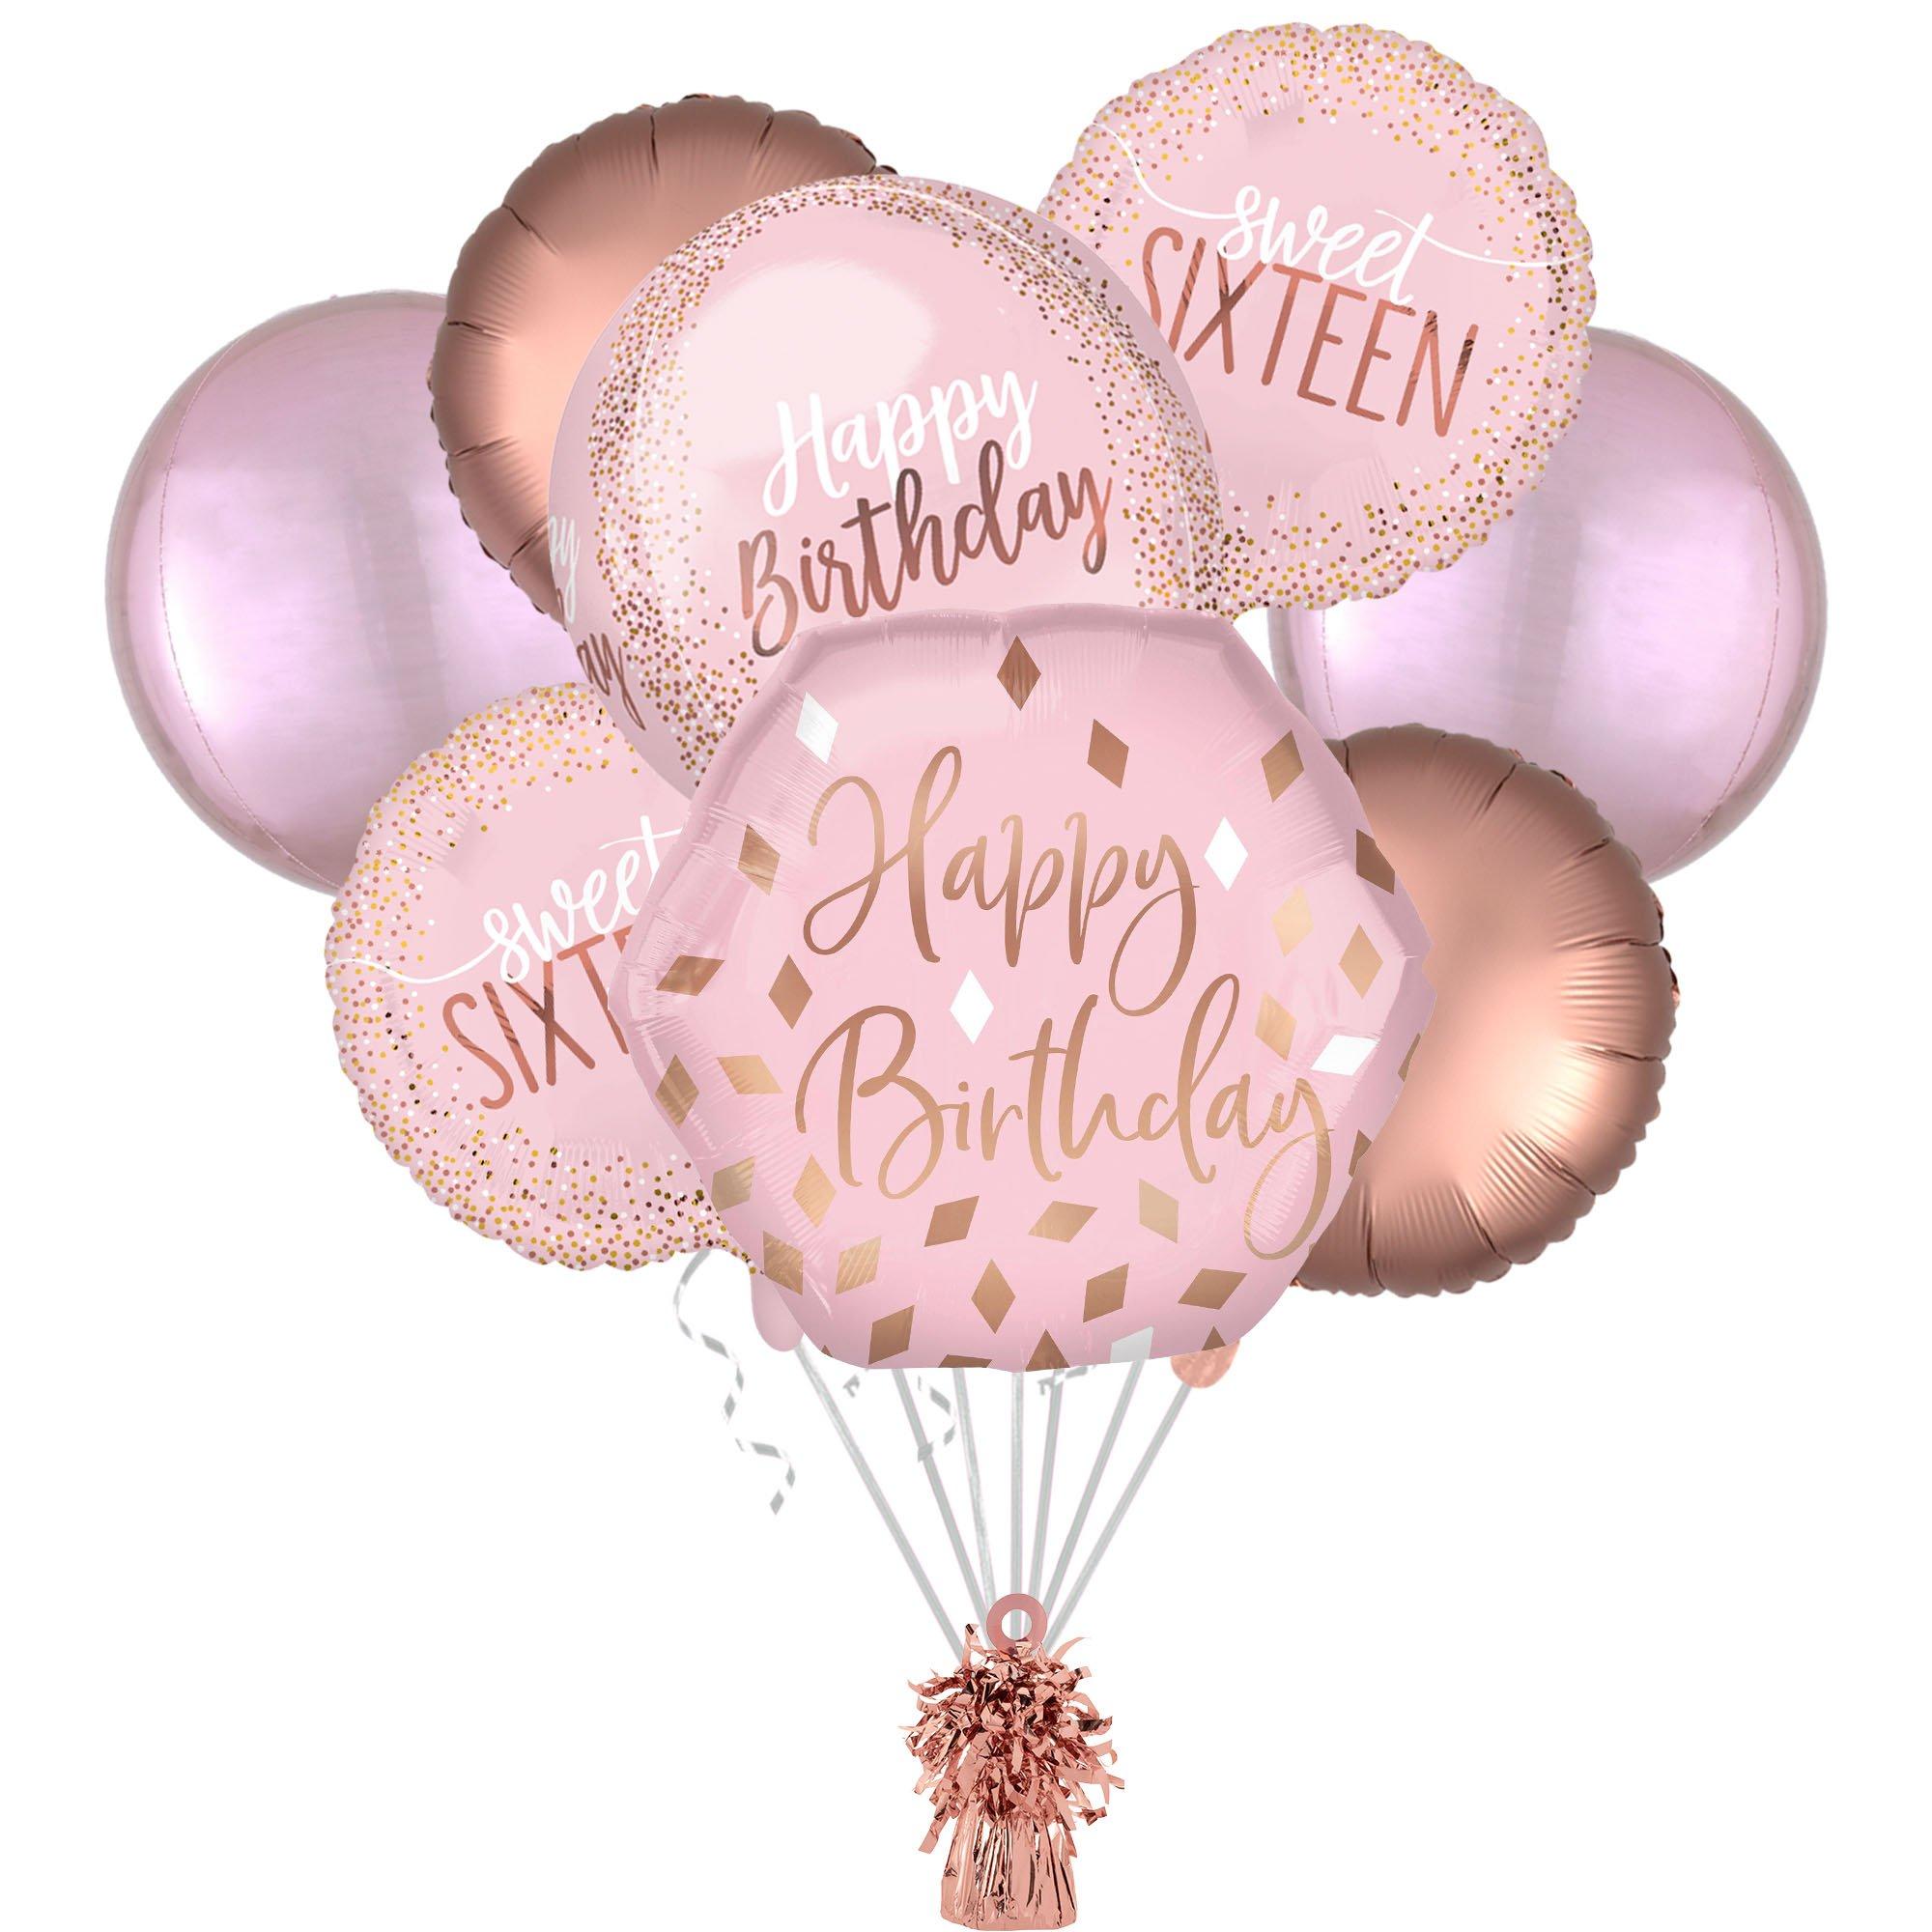 Rose Gold and Gold Happy Birthday Balloon Bouquet